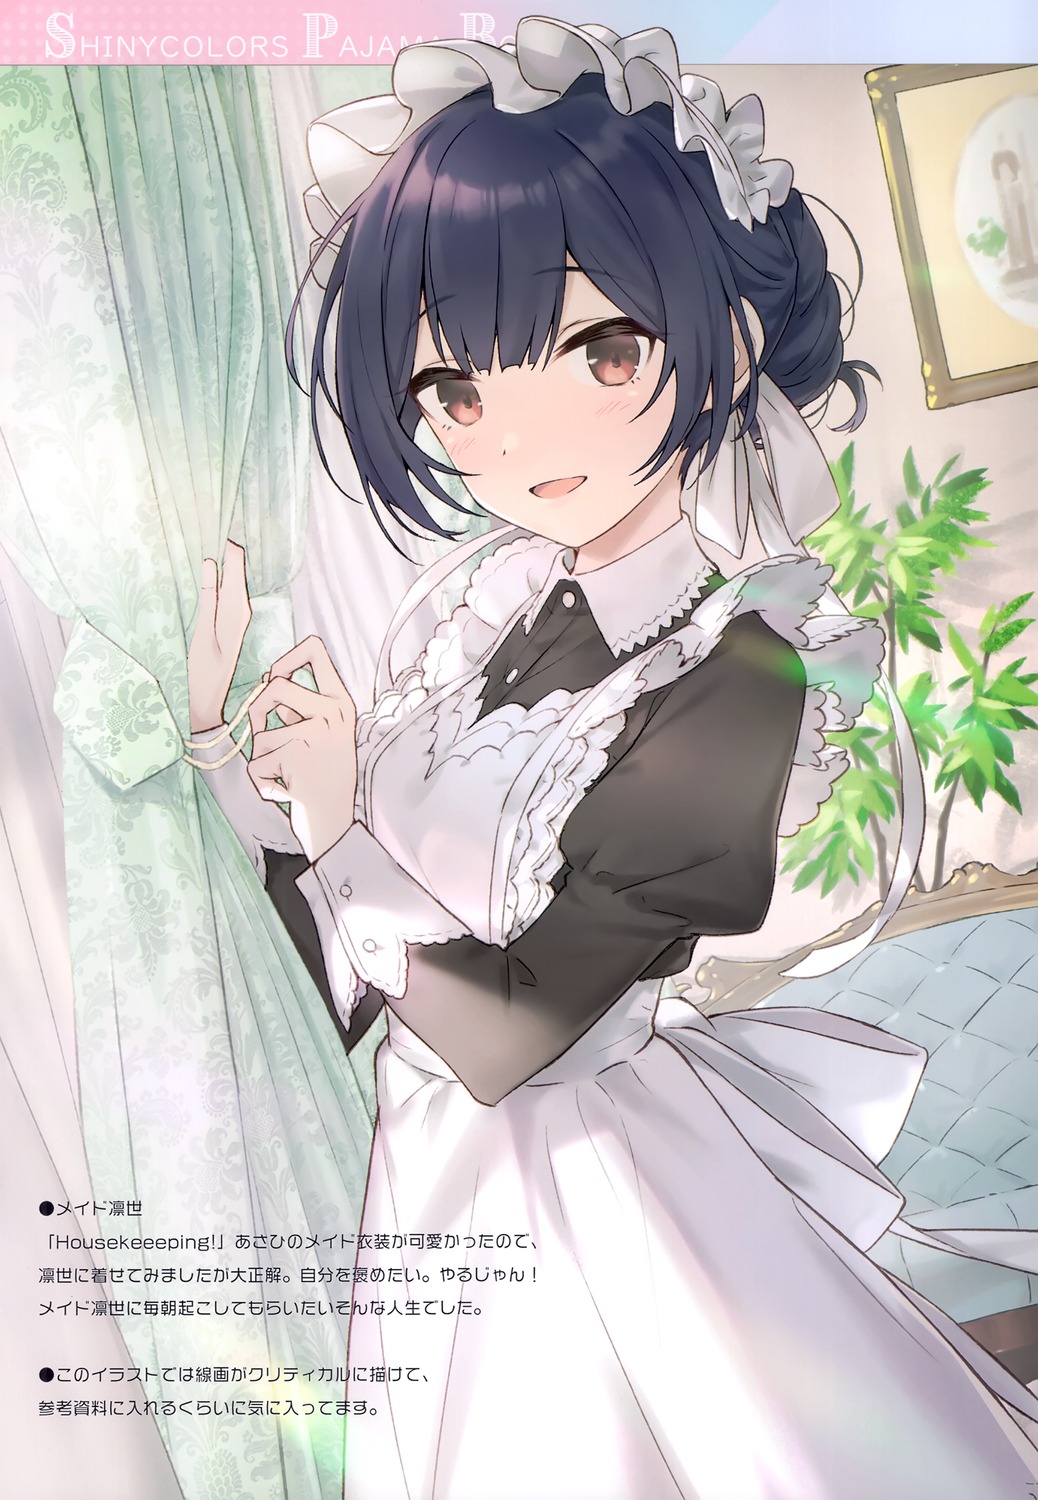 hayashi_kewi maid morino_rinze the_idolm@ster the_idolm@ster_shiny_colors